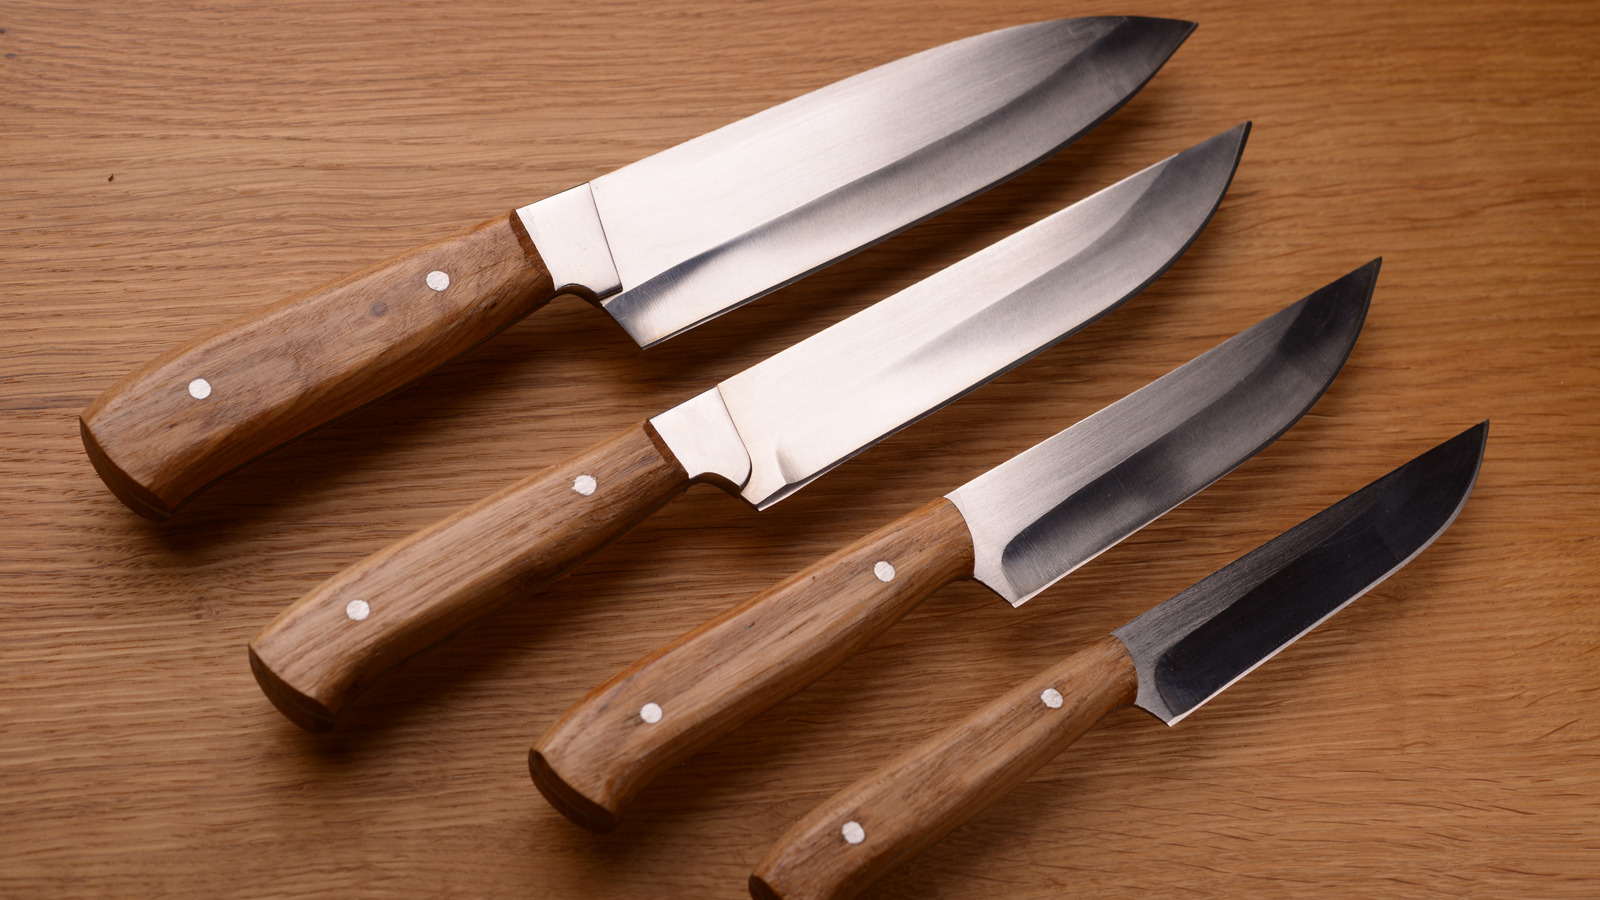 What Makes Carbon Steel And Stainless Steel Knives Different?